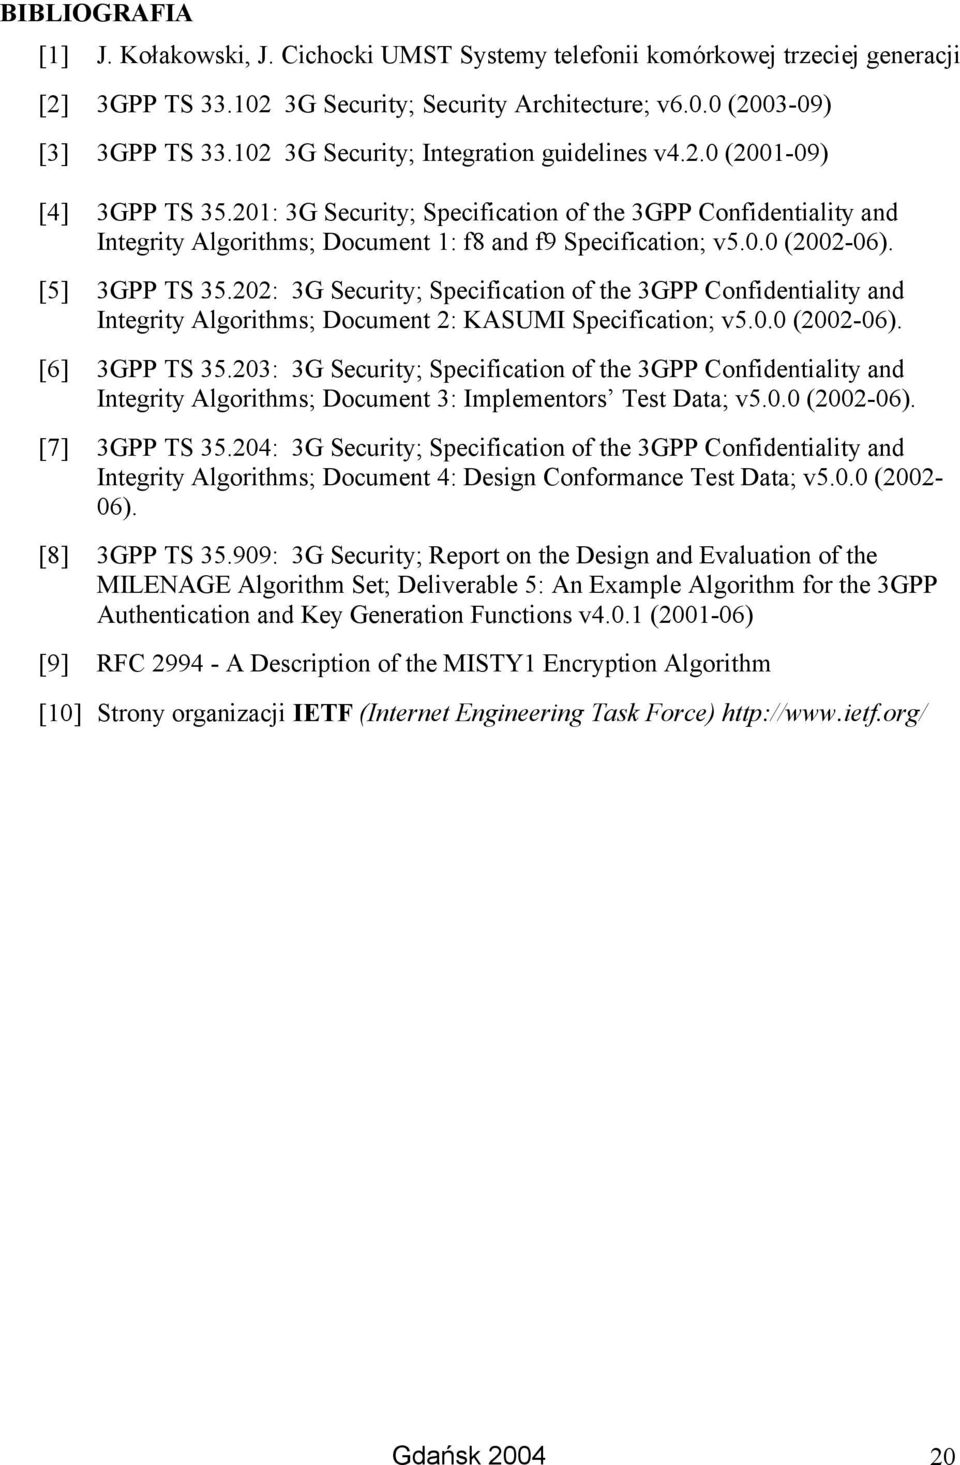 [5] 3GPP TS 35.202: 3G Security; Specification of the 3GPP Confidentiality and Integrity Algorithms; Document 2: KASUMI Specification; v5.0.0 (2002-06). [6] 3GPP TS 35.